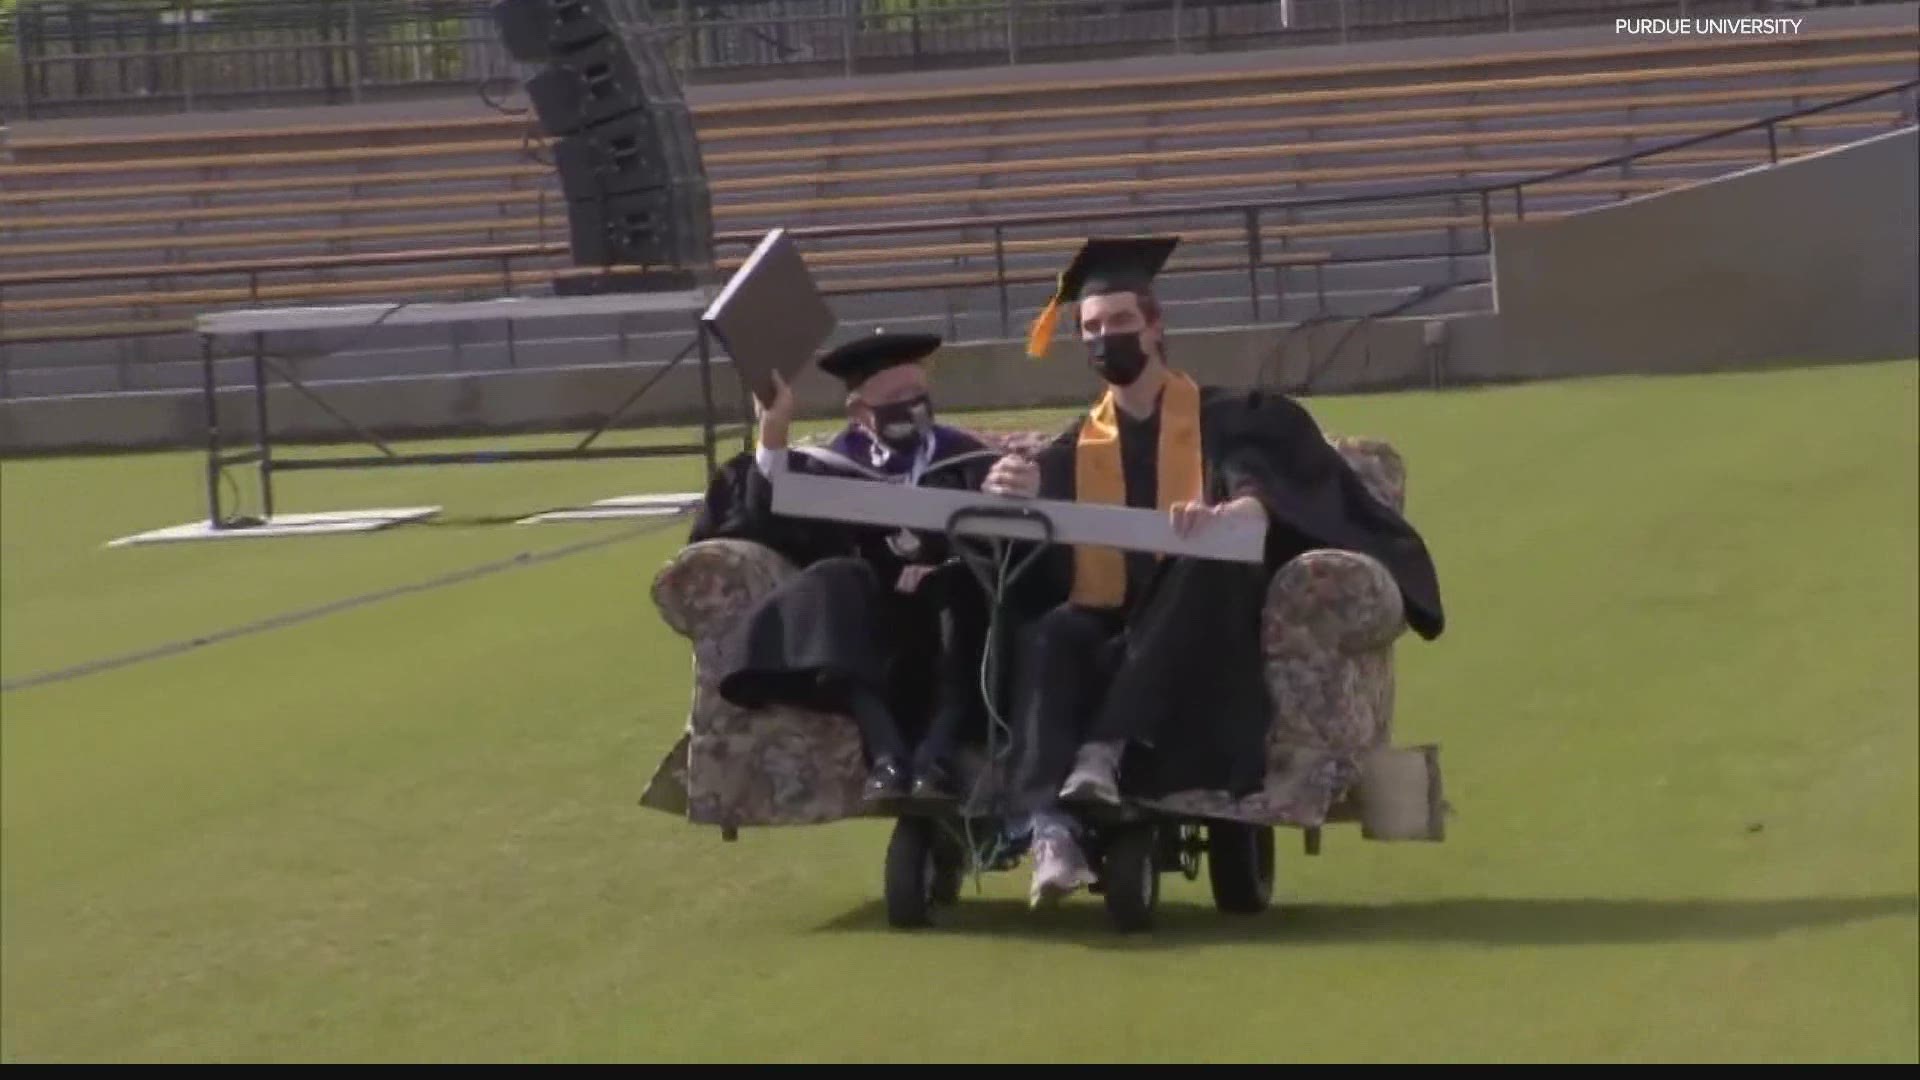 Former Indiana governor and current Purdue University President Mitch Daniels arrived at the university's commencement via a "couch cart."